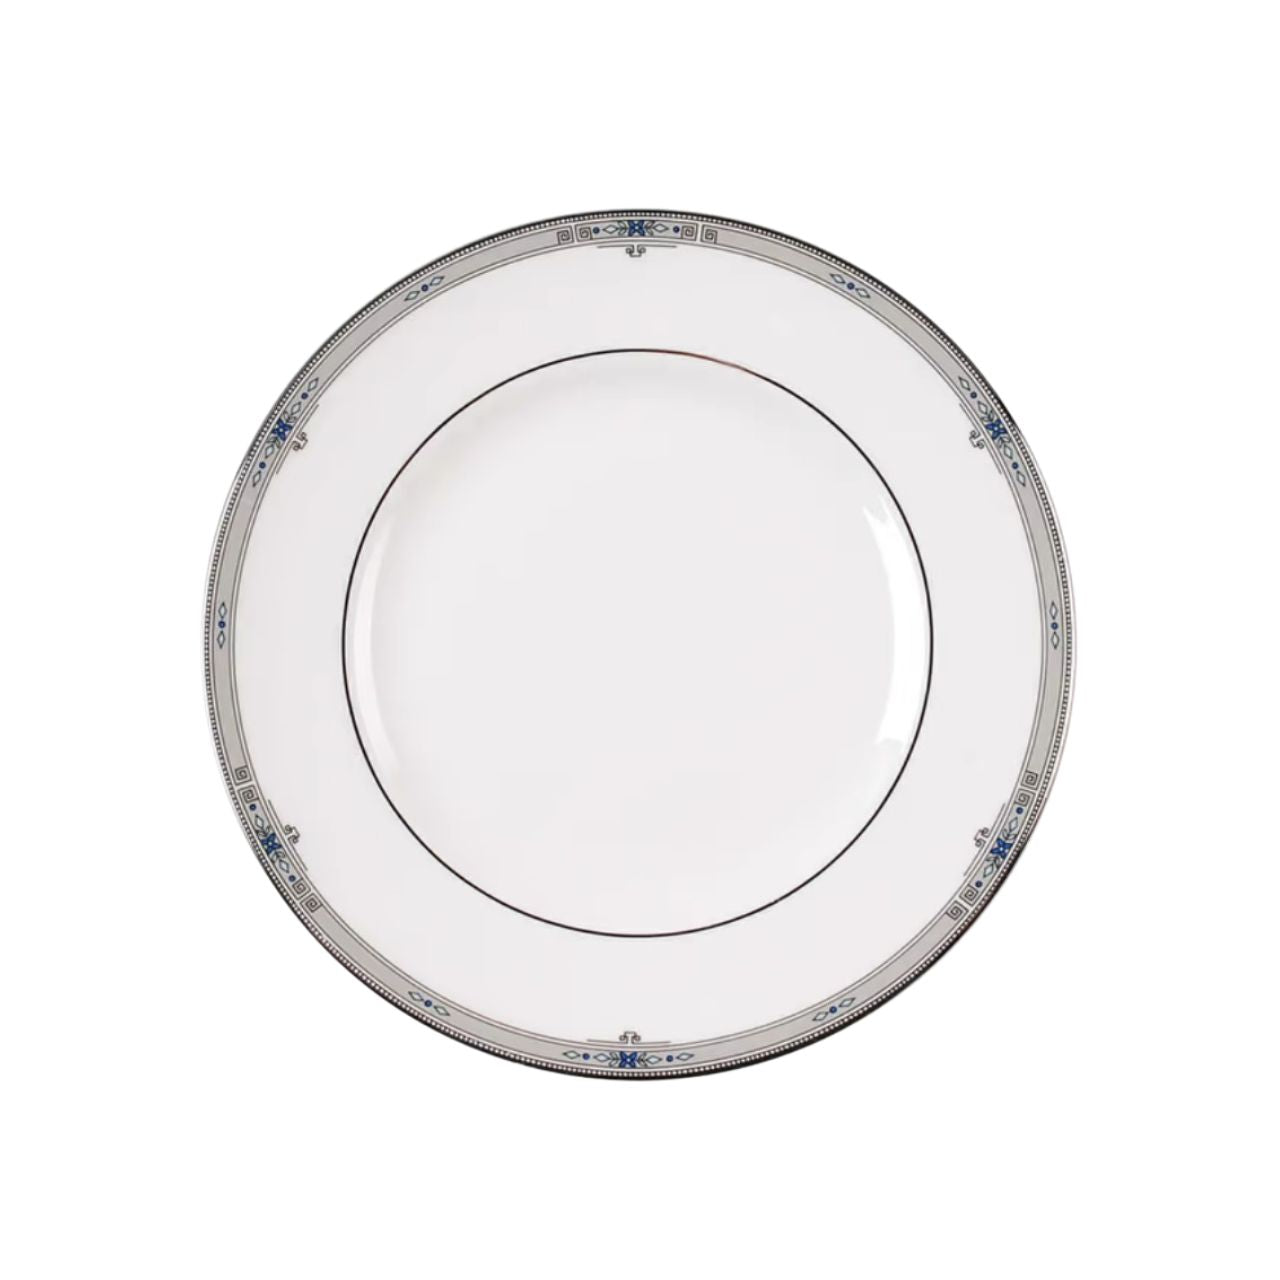 Wedgwood Amherst 8" Salad Side Plate Platinum Trim  The Wedgwood Amherst collection is best known for it’s elegance and sophistication. Amherst features a classic but contemporary finish with it’s soft grey and black accented throughout the fine bone china pieces.